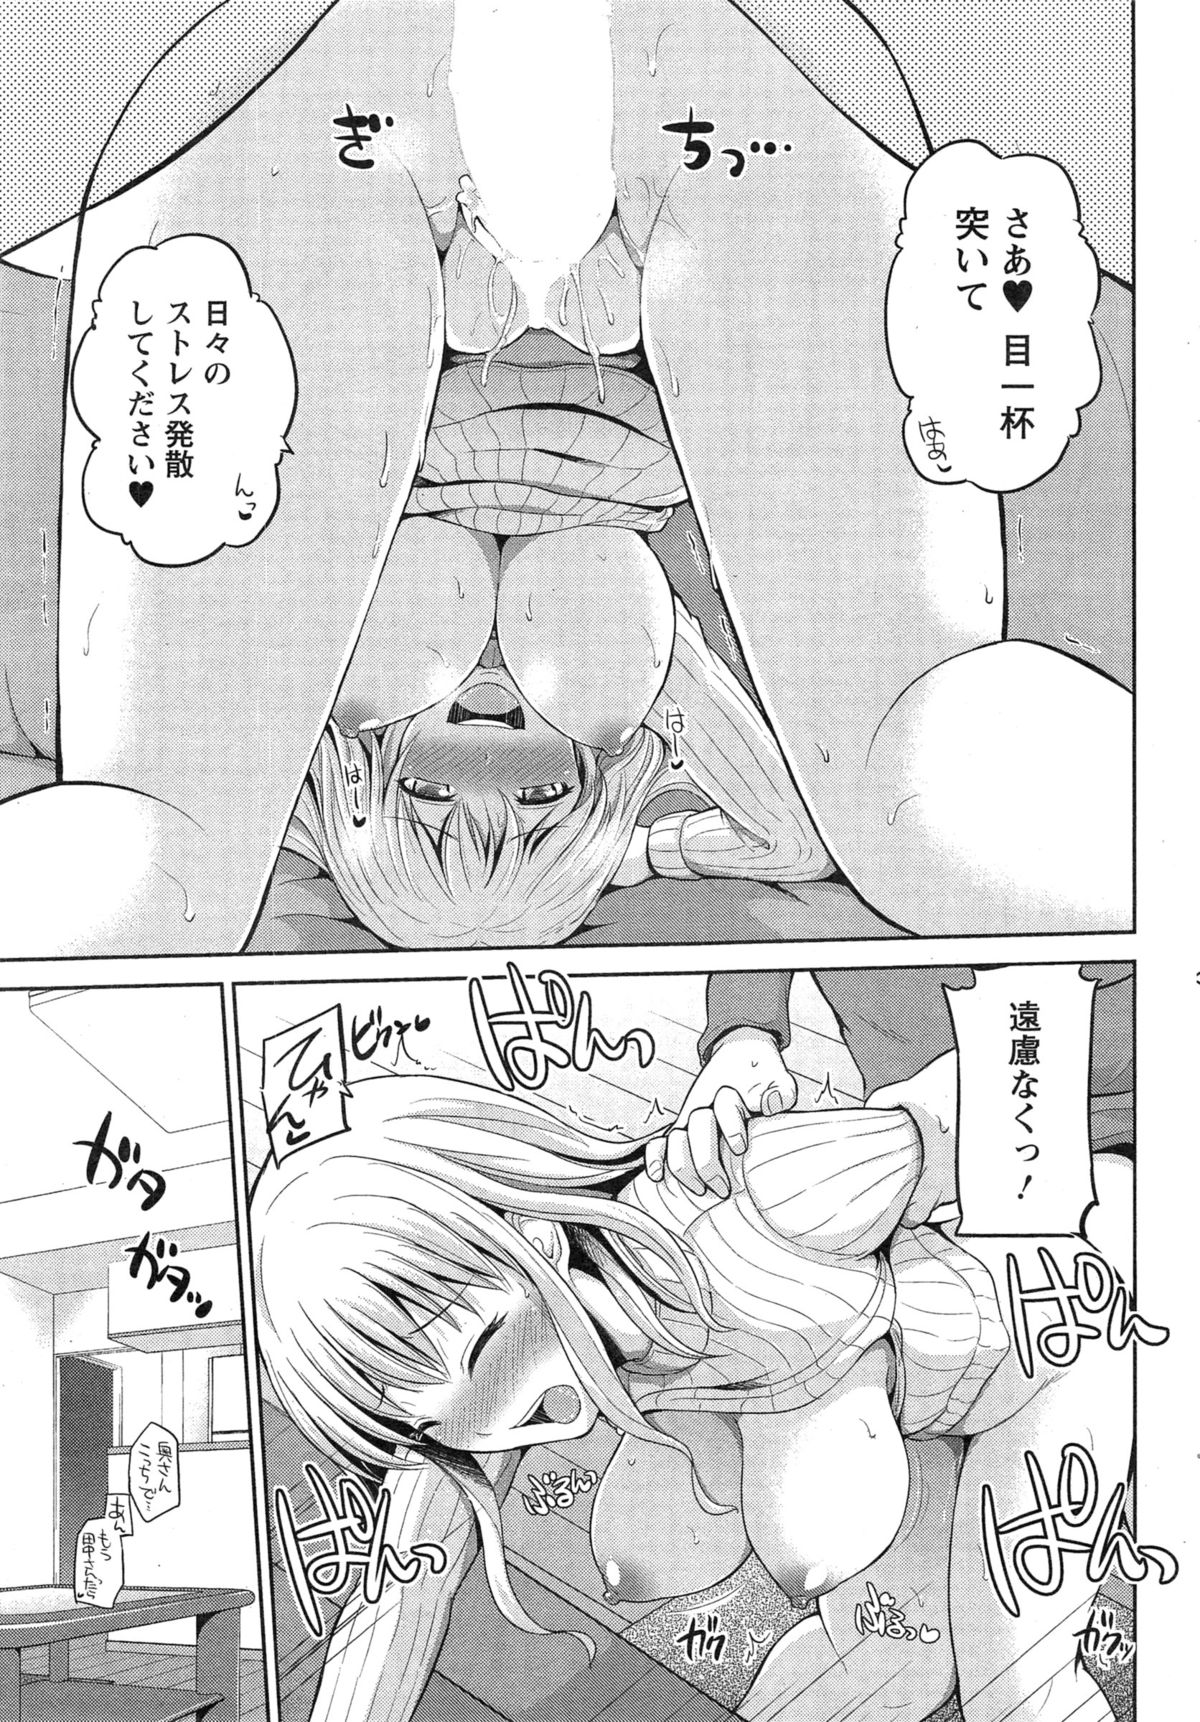 Action Pizazz DX 2015-03 page 39 full